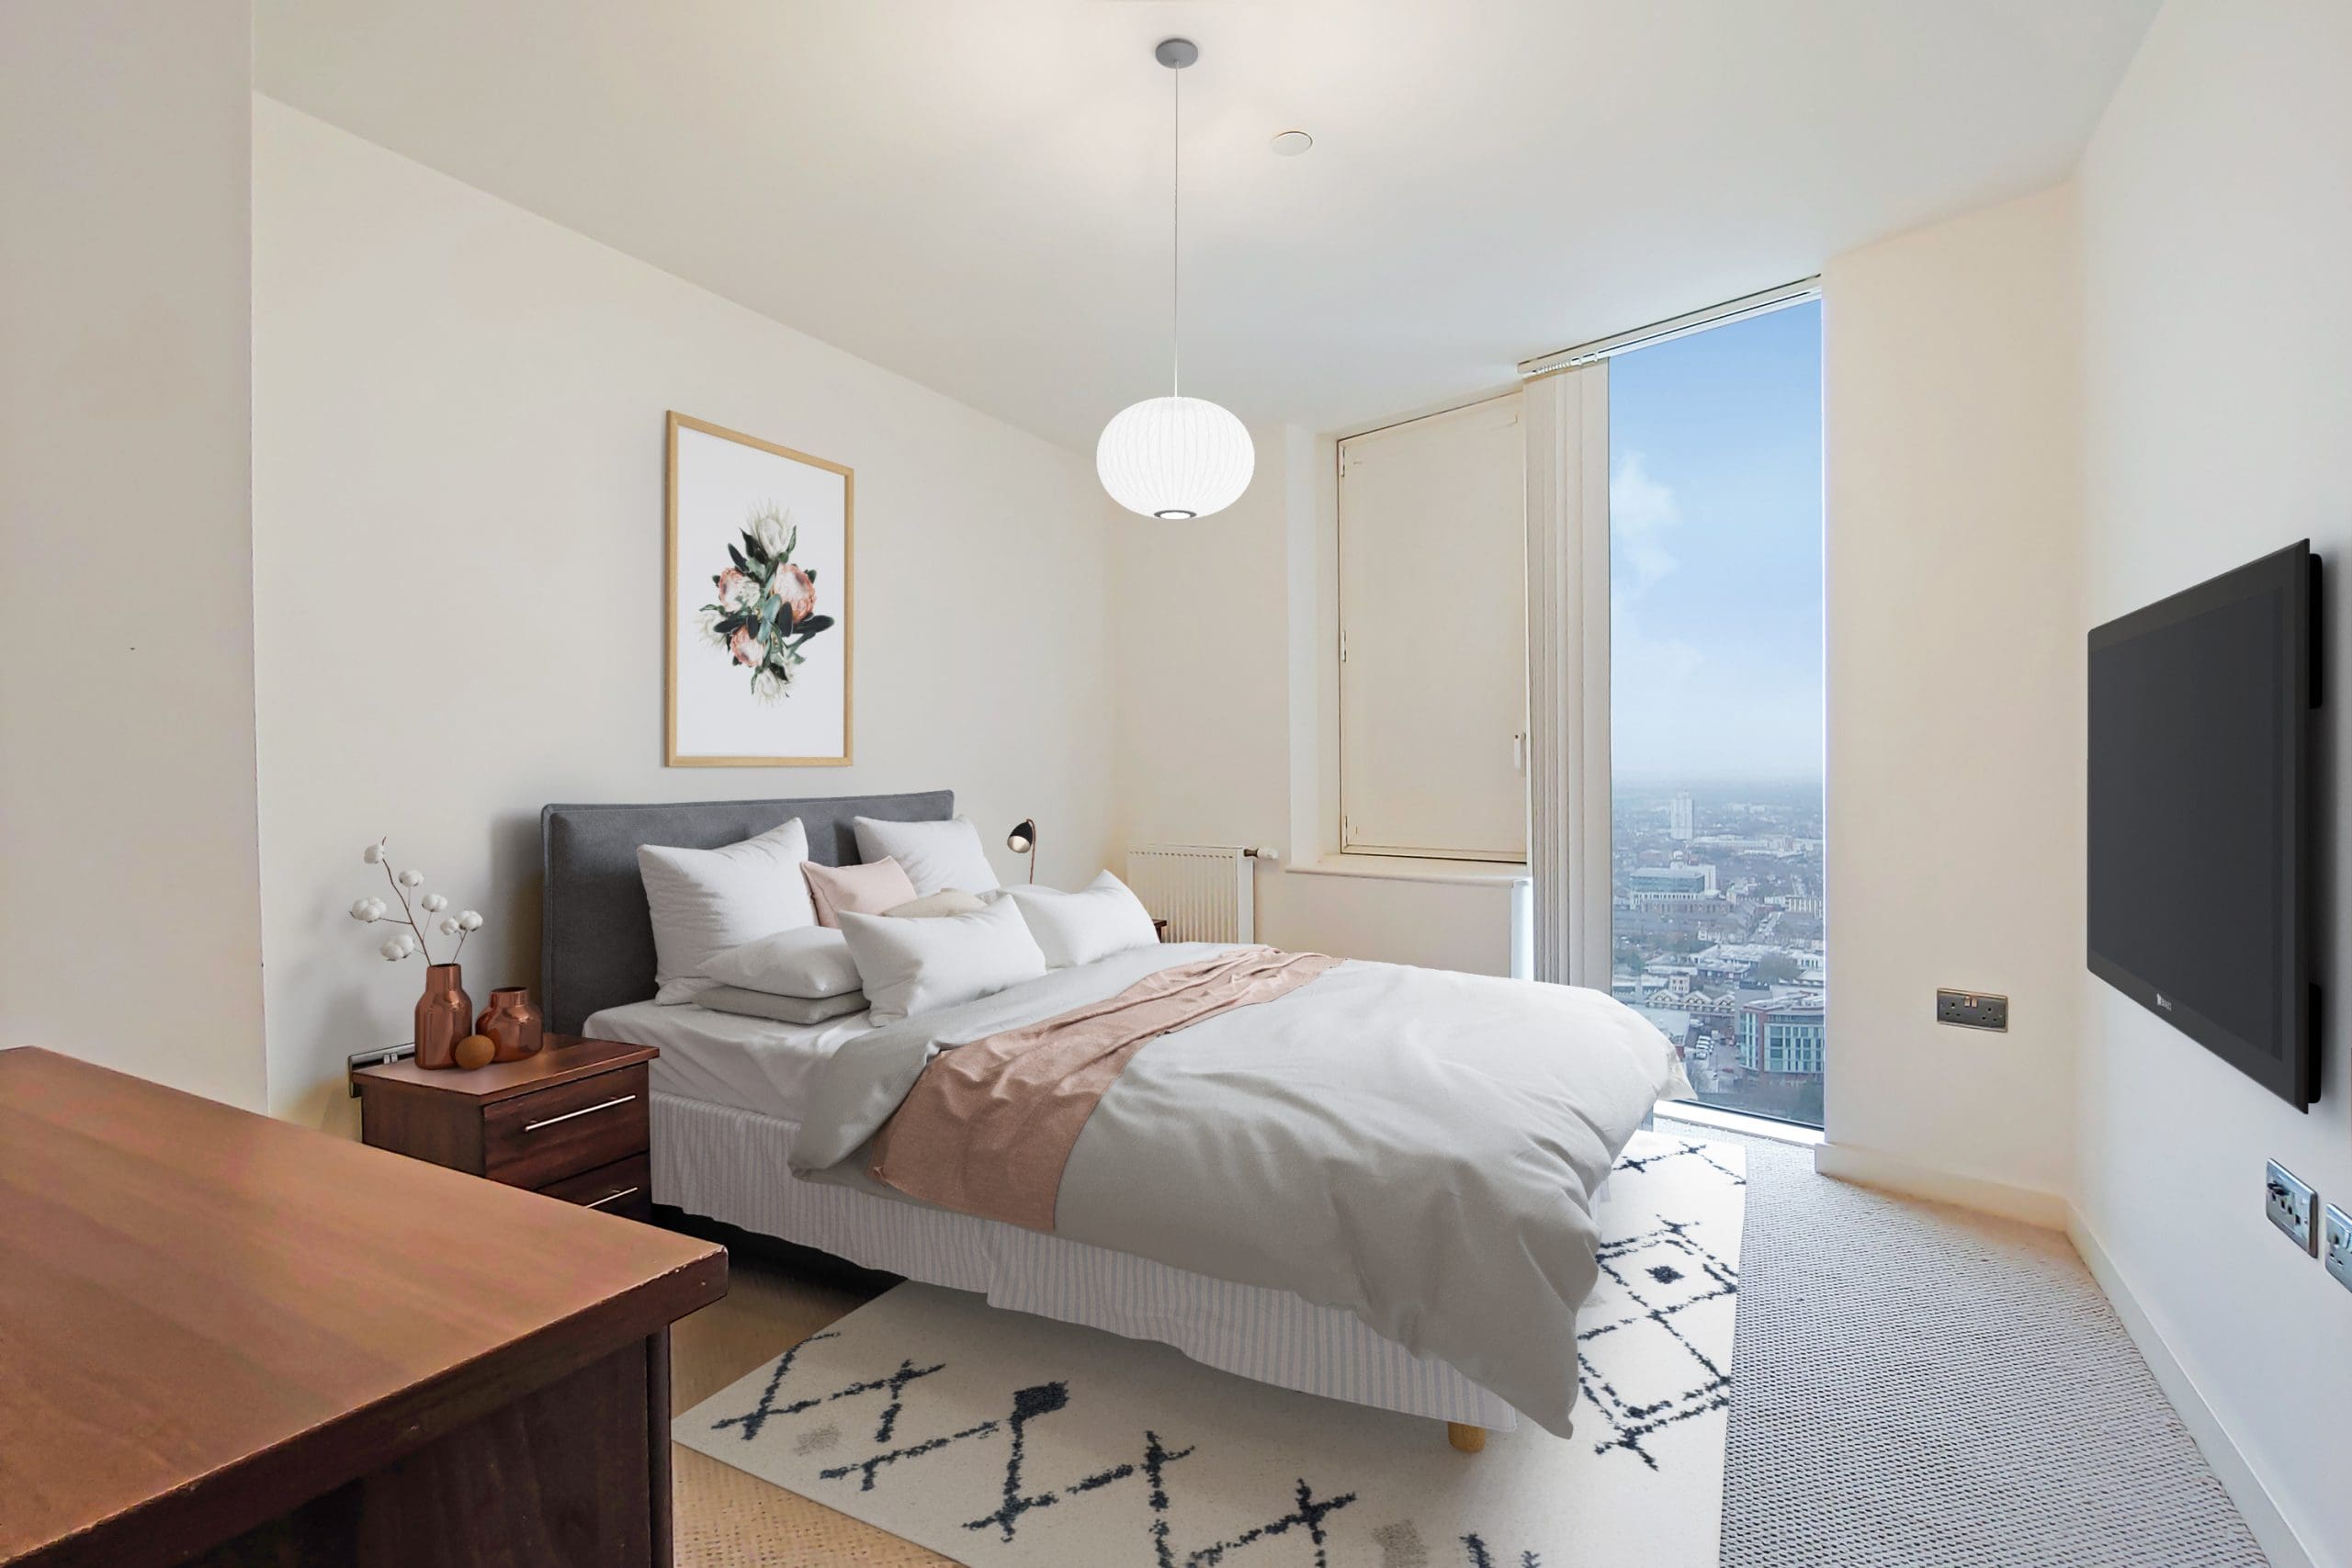 Bedroom with a double bed and floor to ceiling window at the Stratford Halo development.